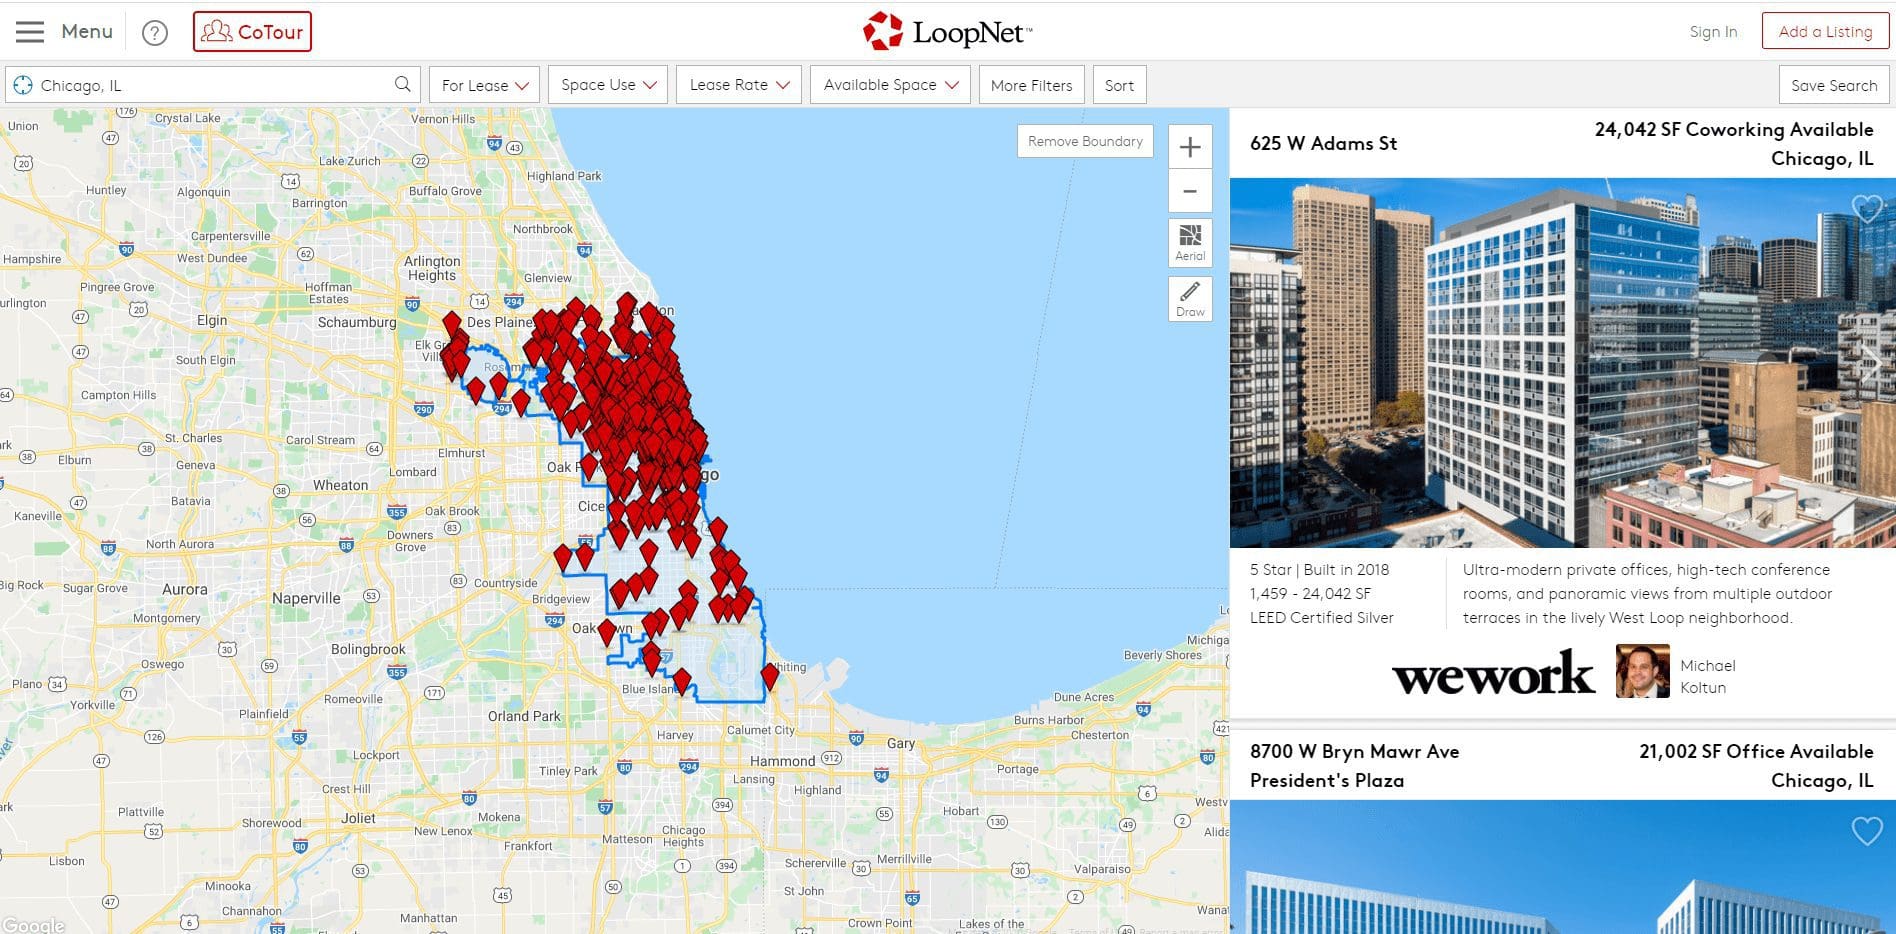 A Chicago-area map with listings of apartment buildings for sale on the Loopnet platform